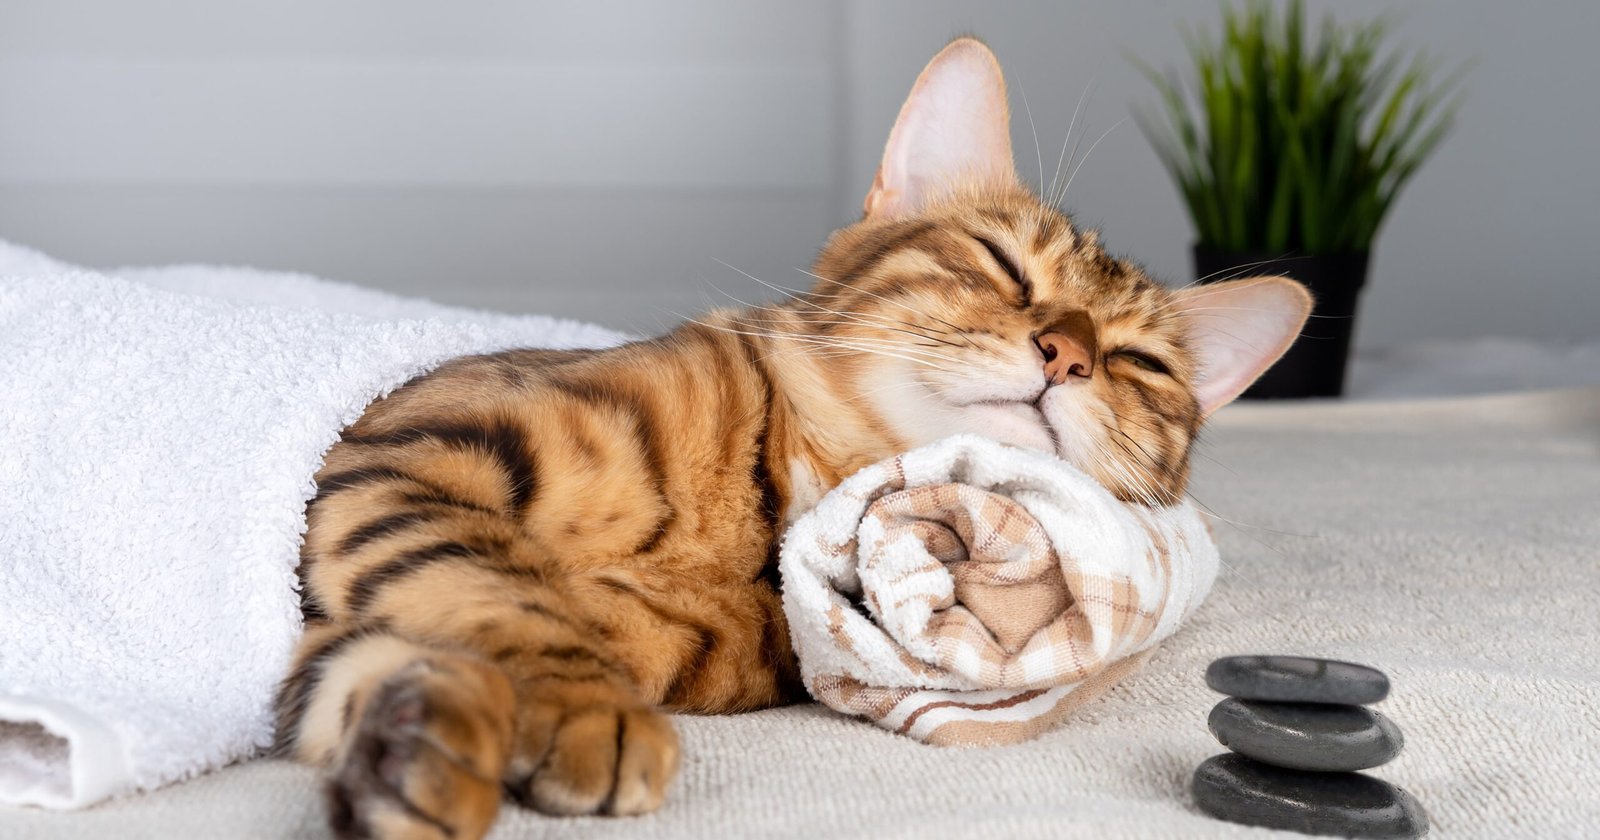 How To Care For A Bengal Cat